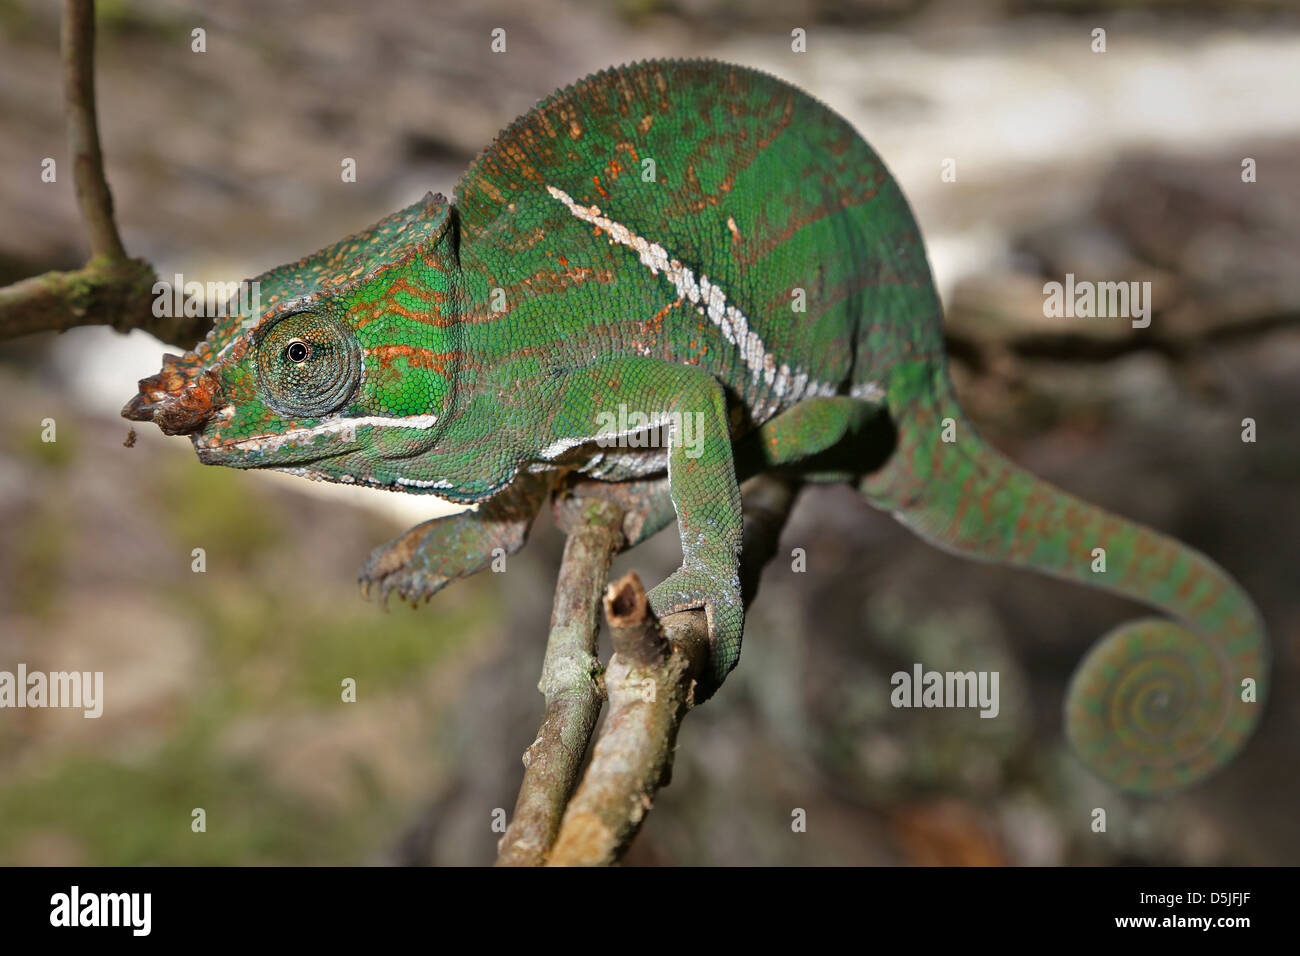 ENDANGERED Rainforest or Two-banded Chameleon (Furcifer balteatus) stalking insects in a tree in the wilds of Madagascar. Stock Photo